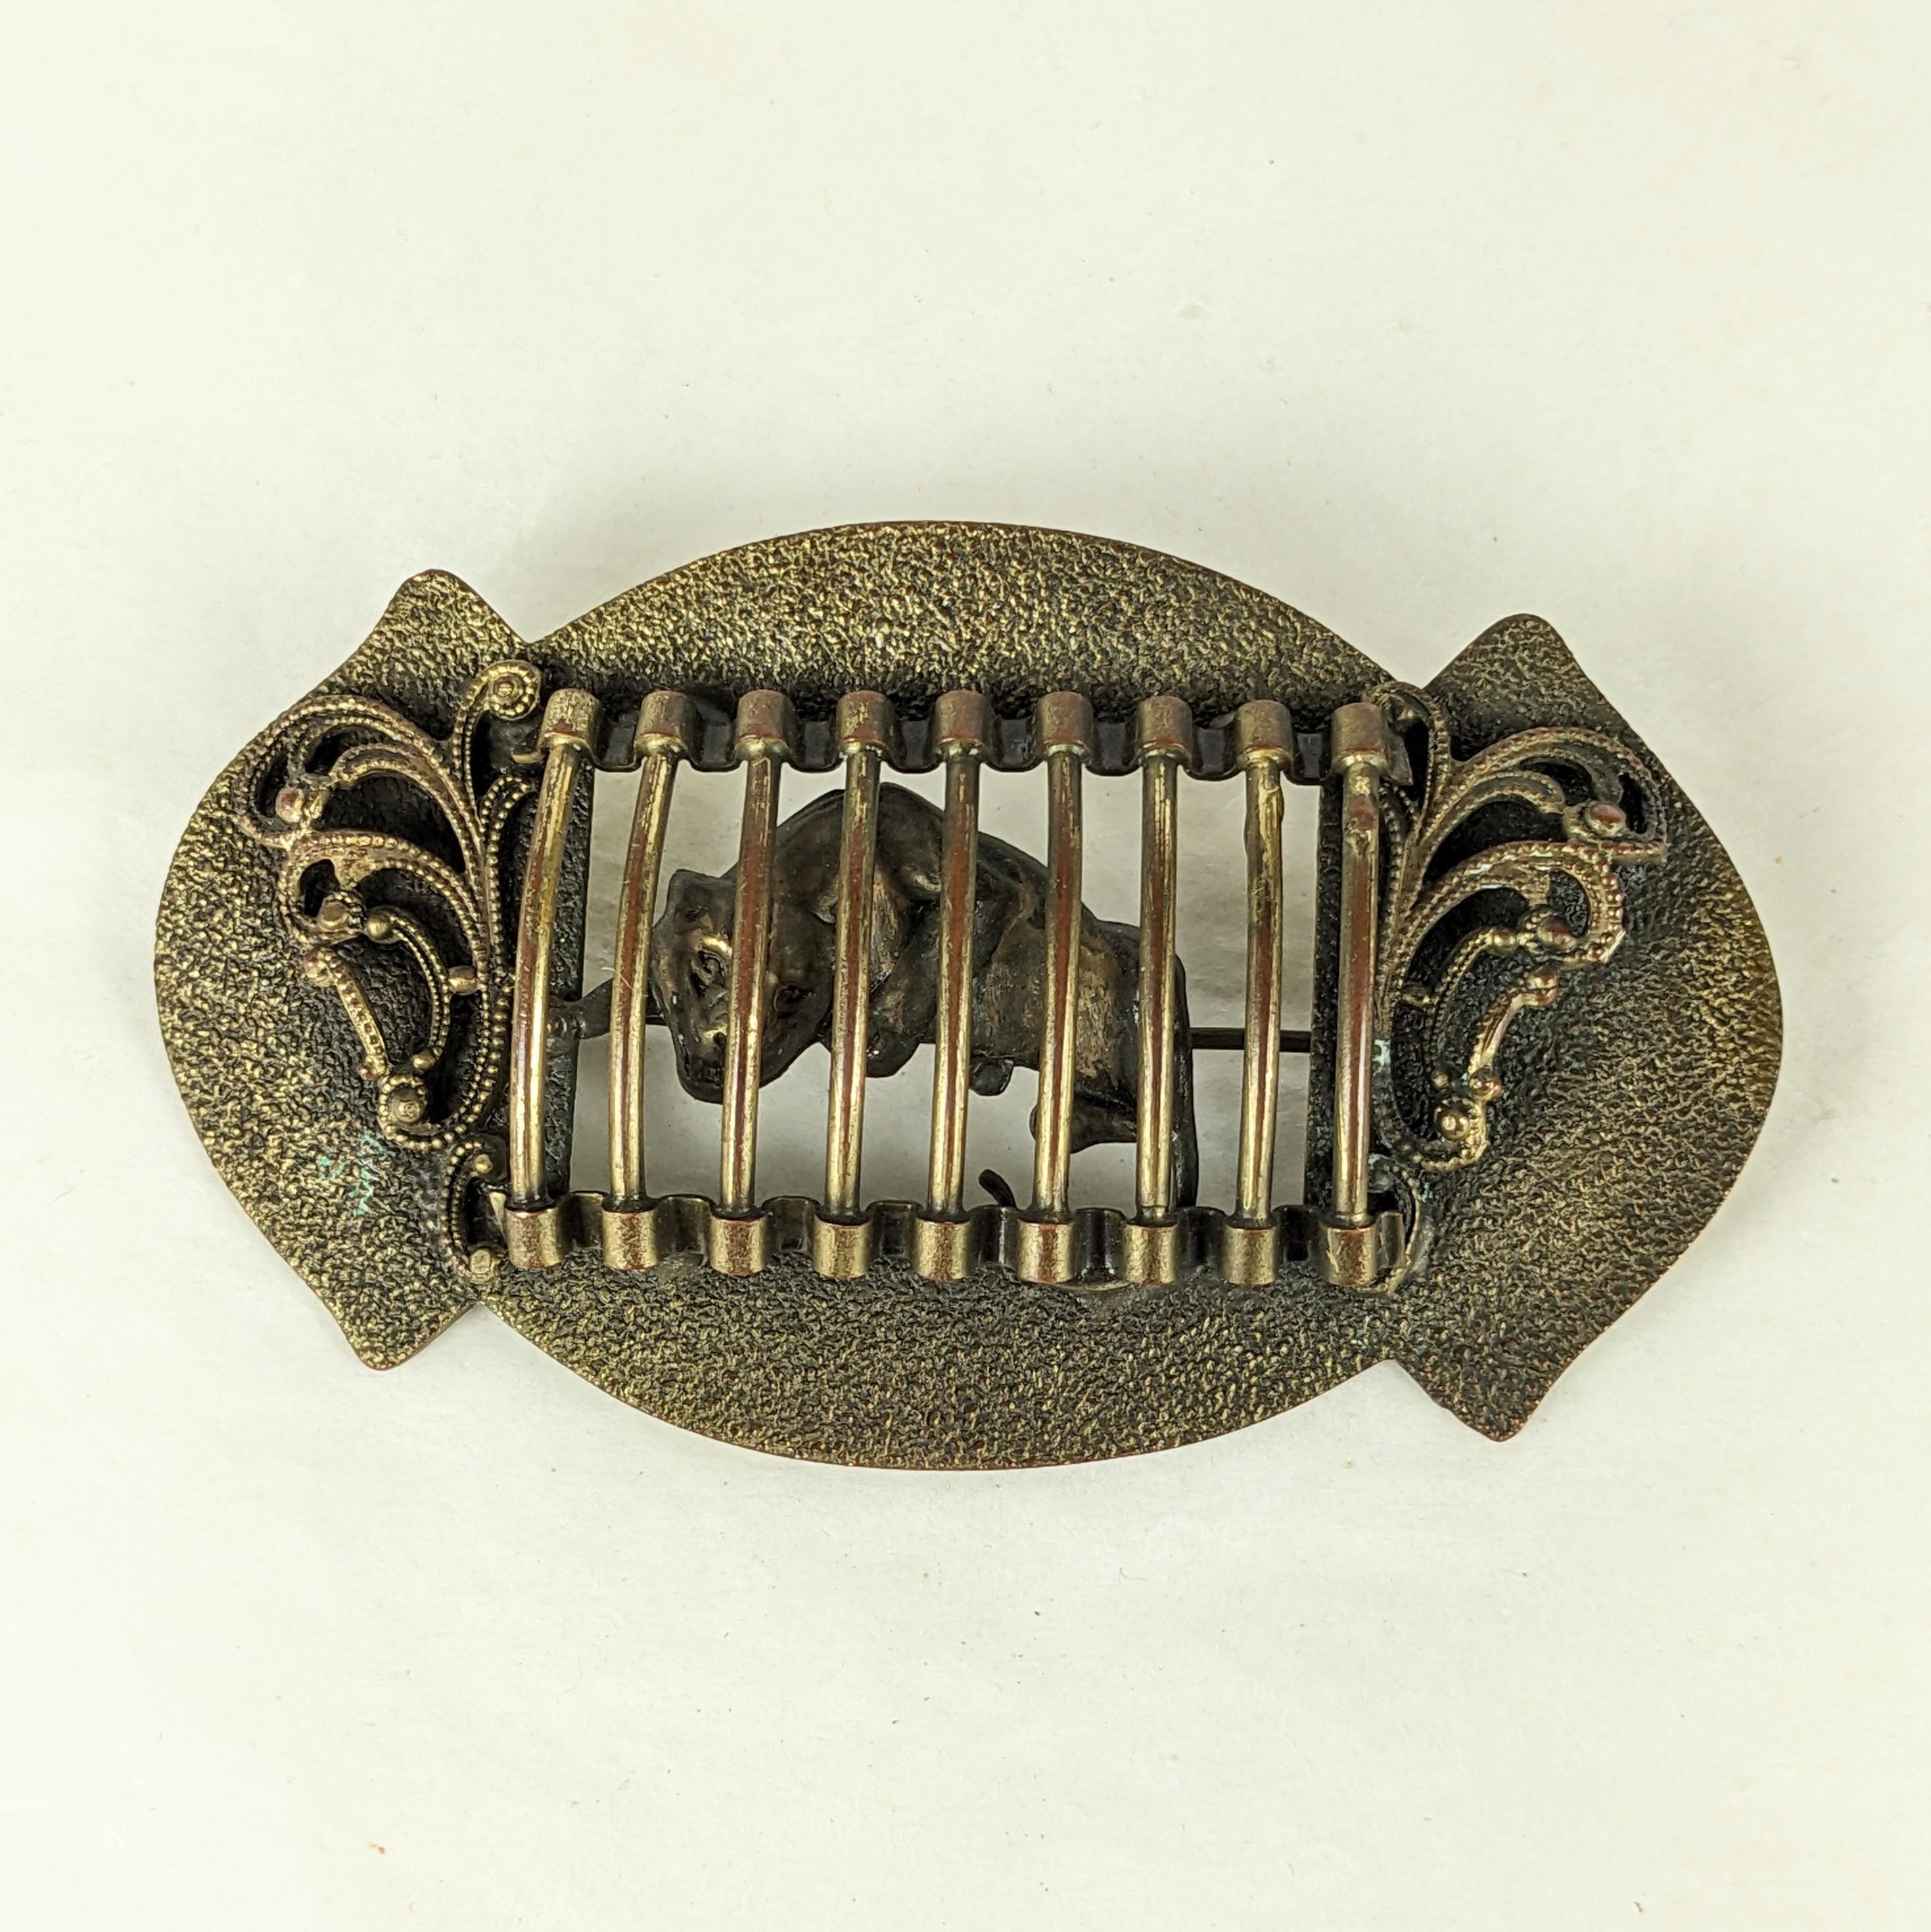 Unusual Victorian Caged Tiger Sash Pin from the late 1800's. Textured antique brass frame with filigree adornments on each side of the 3D cage with tiger set behind. Cool and unusual subject, 1890's USA. 
Large 3.5